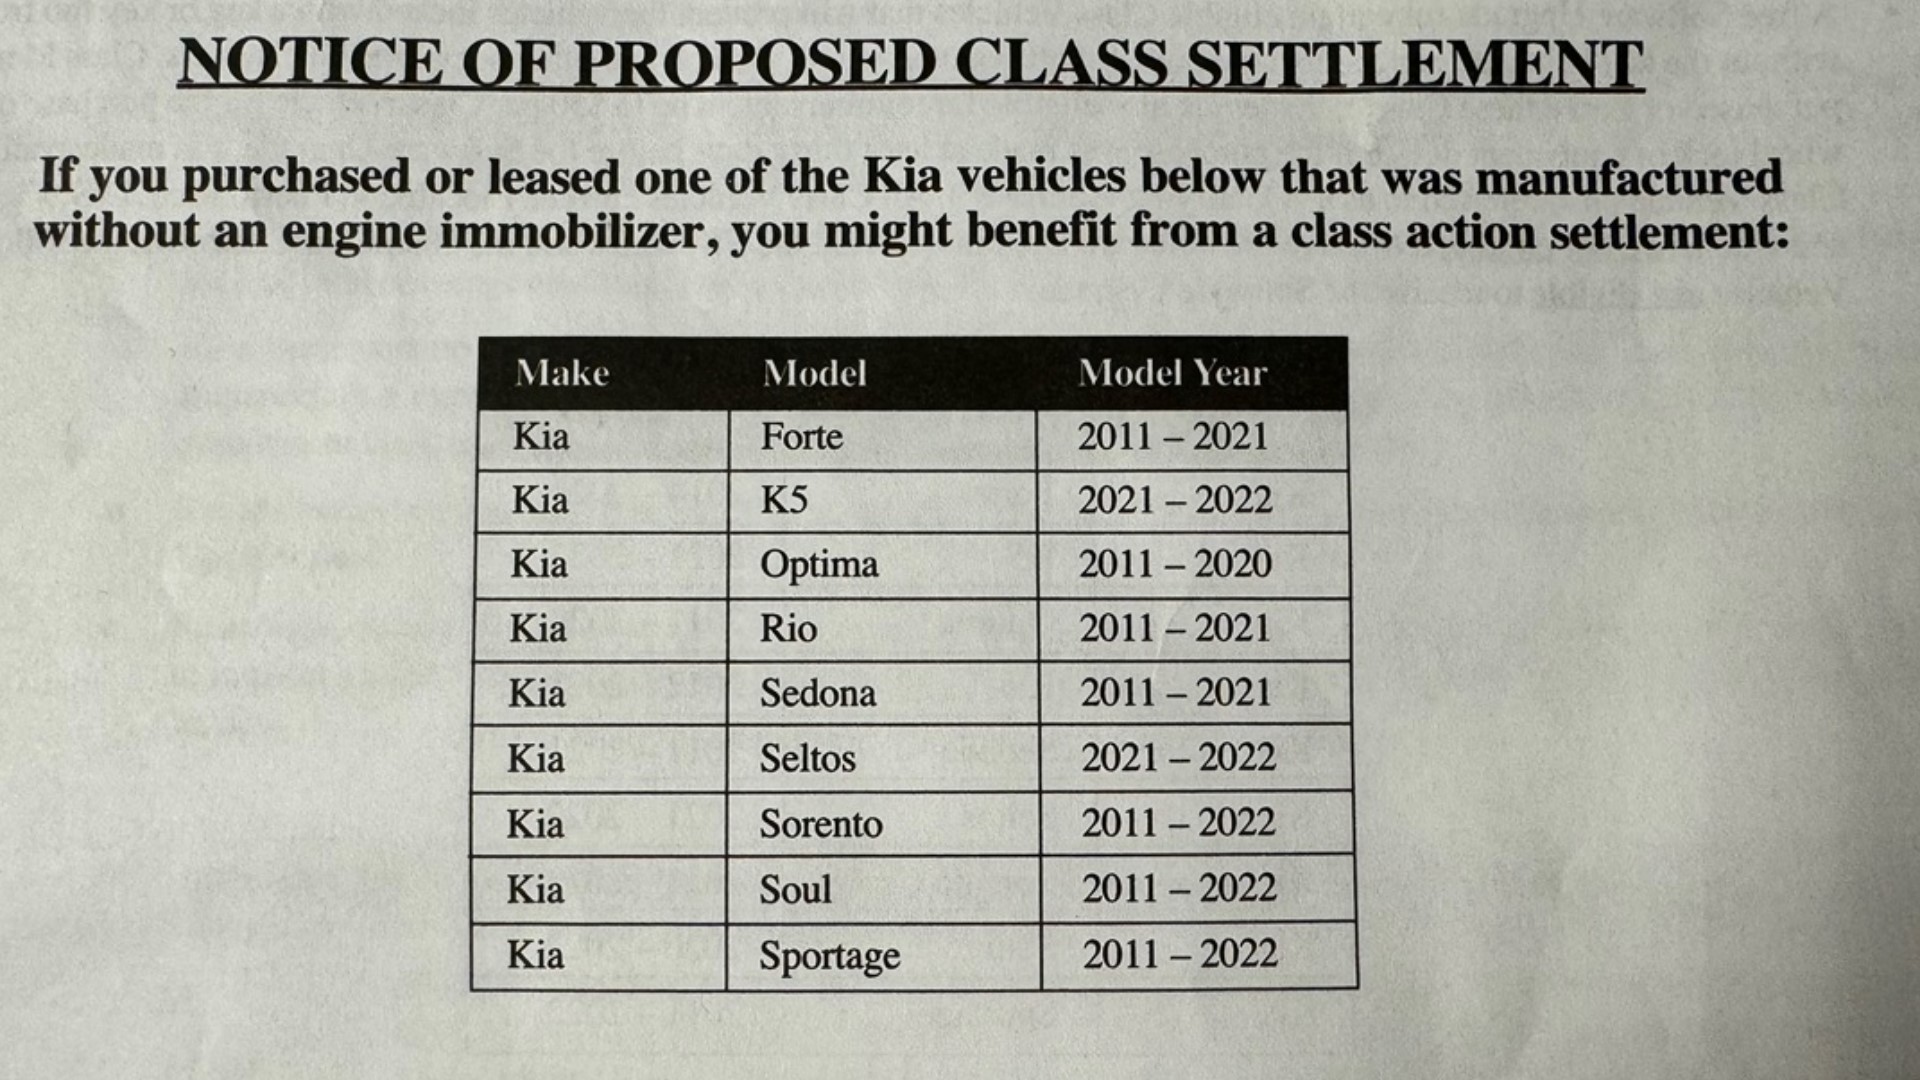 Kia will reimburse you for locks and insurance if you provide proof.